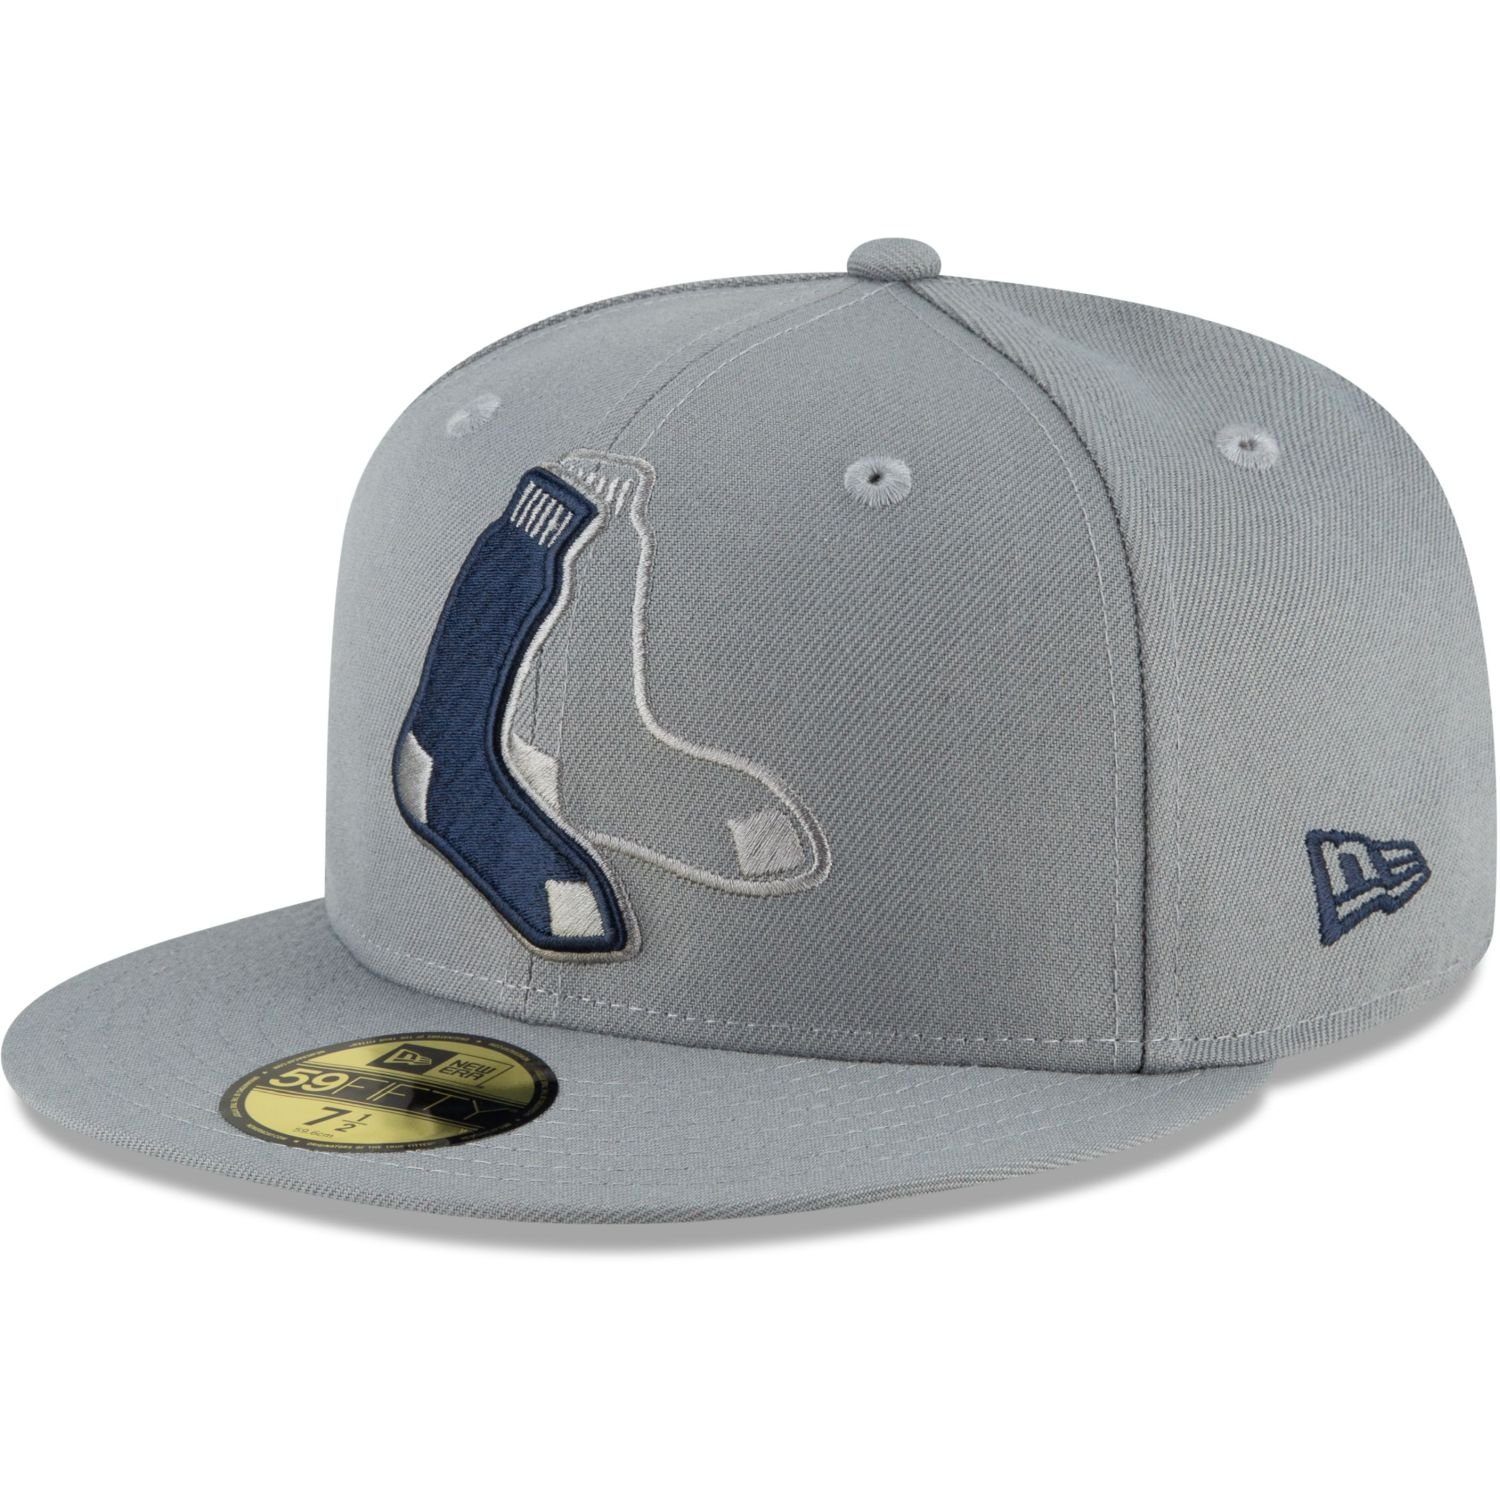 New Era Fitted Cap 59Fifty STORM GREY MLB Cooperstown Team Boston Red Sox